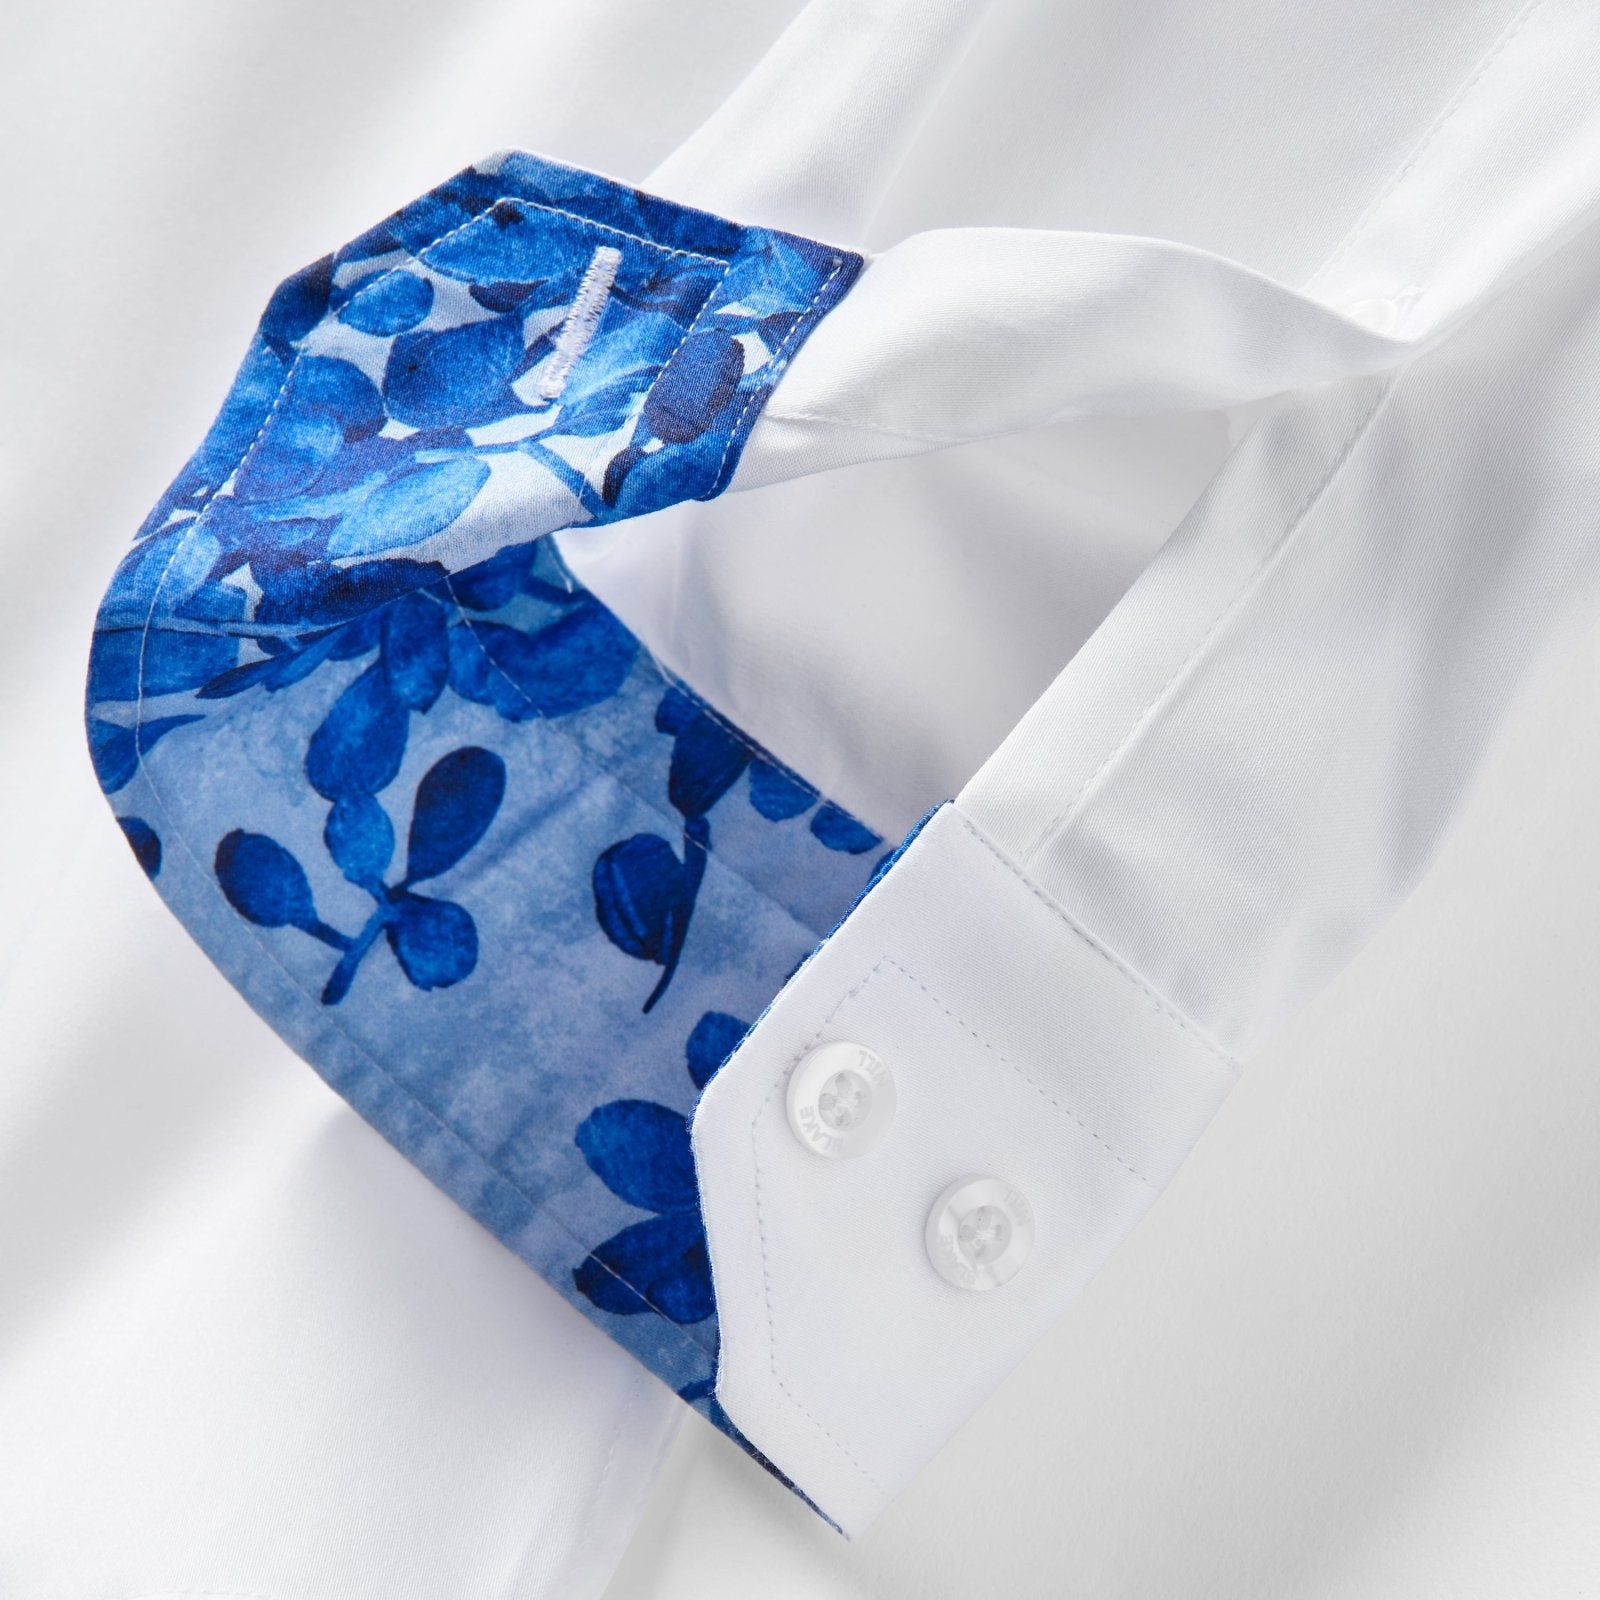 White With Blue Blossom Accents Shirt - Blake Mill